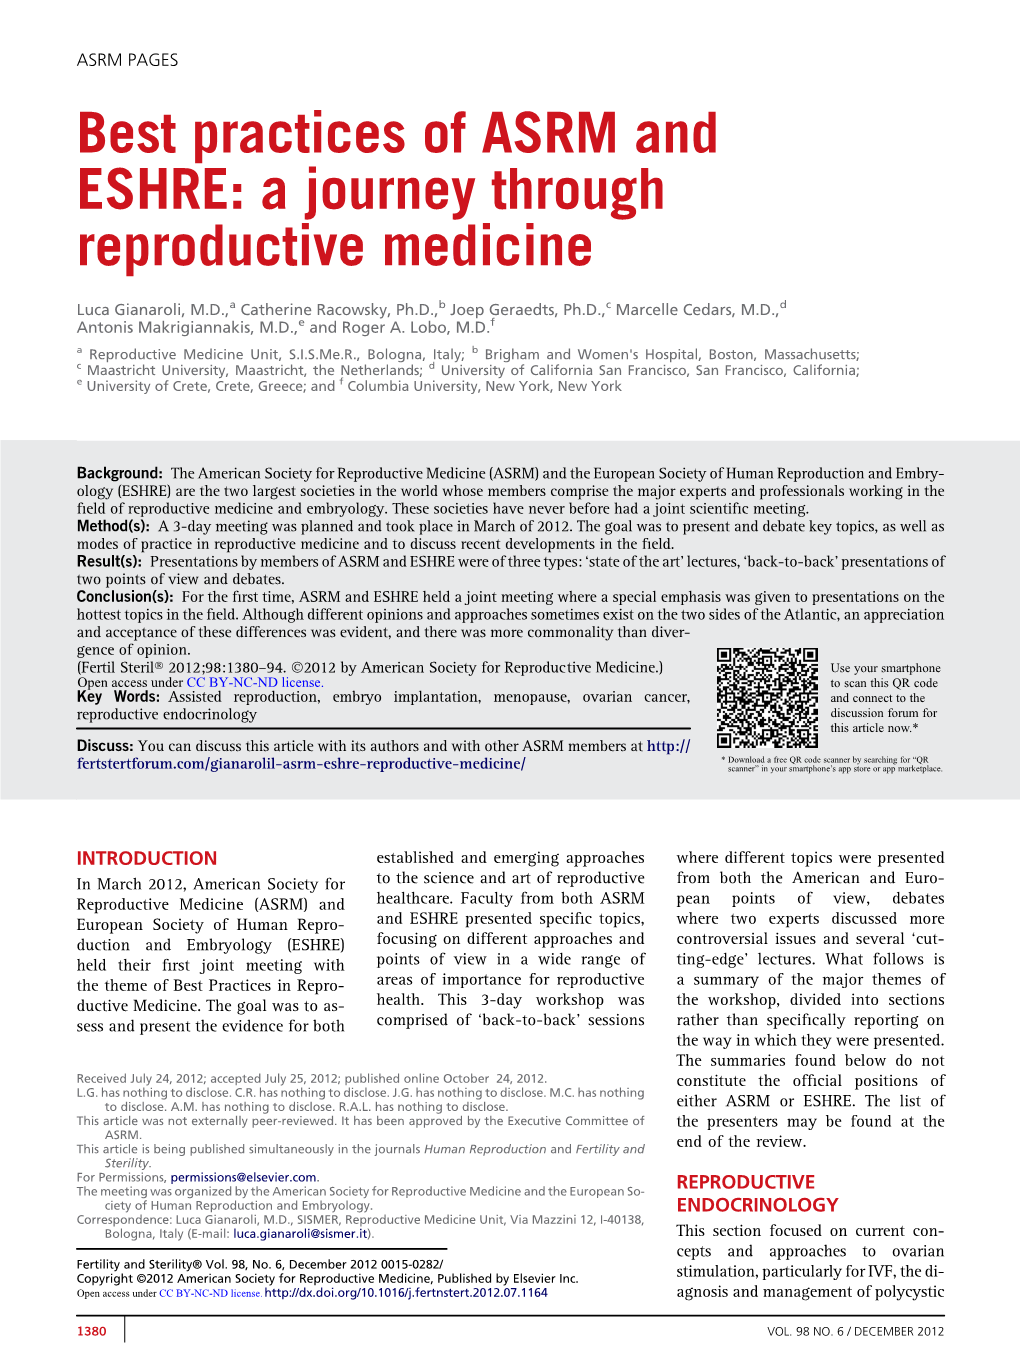 Best Practices of ASRM and ESHRE: a Journey Through Reproductive Medicine